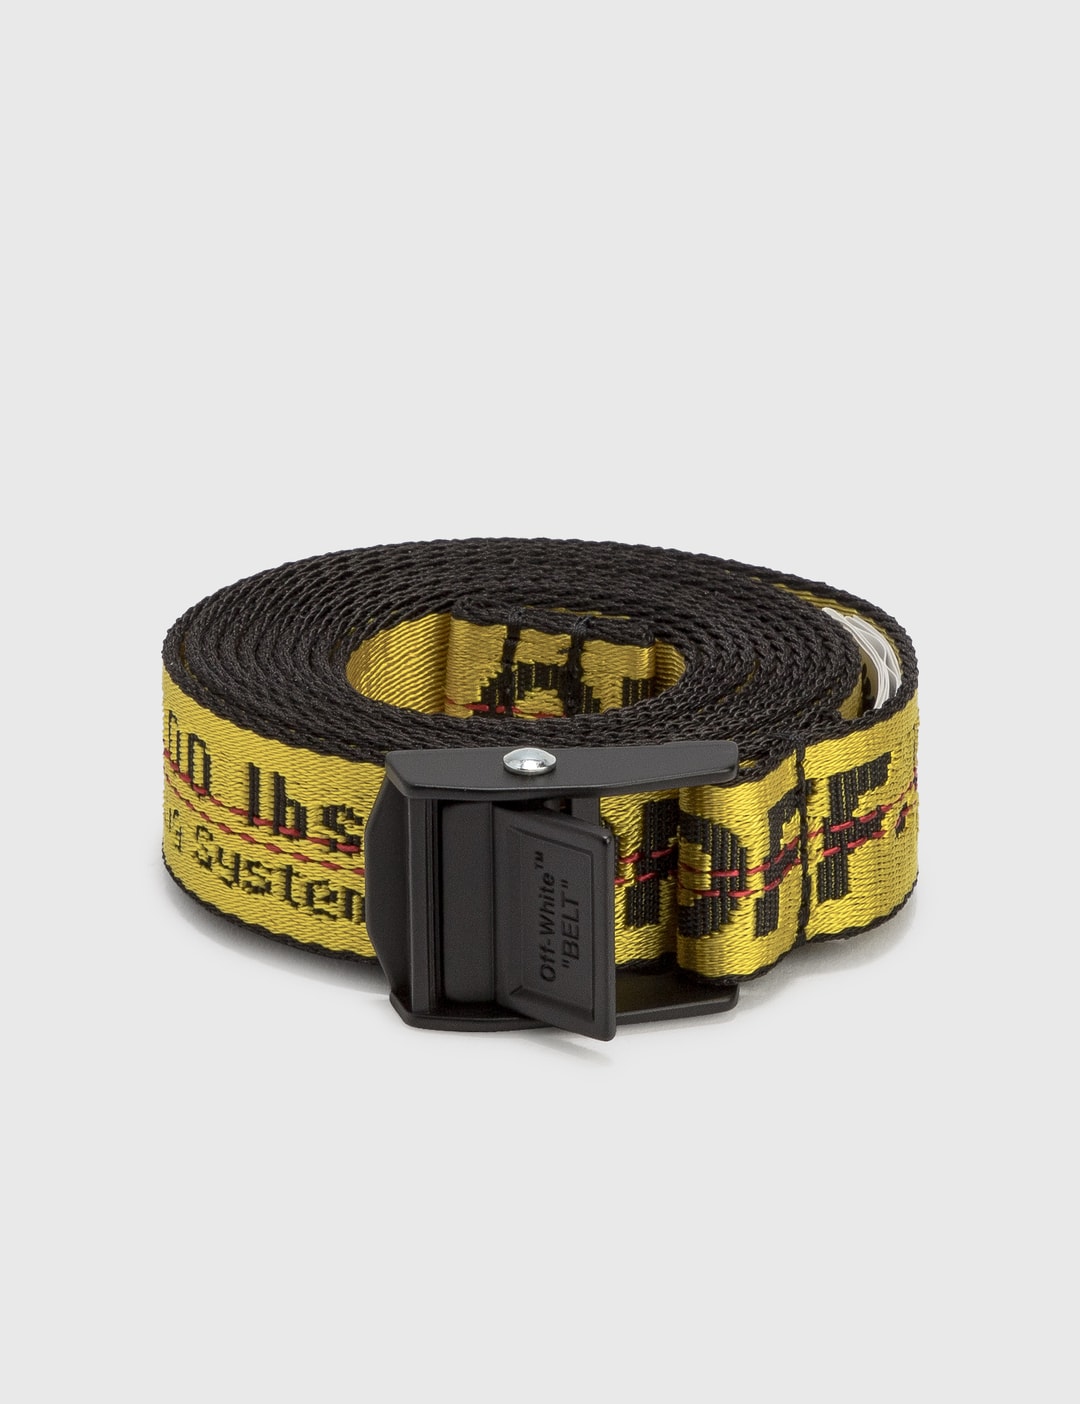 Fashion by | Lifestyle and Globally Industrial Off-White™ HBX Hypebeast Mini - Curated Belt -